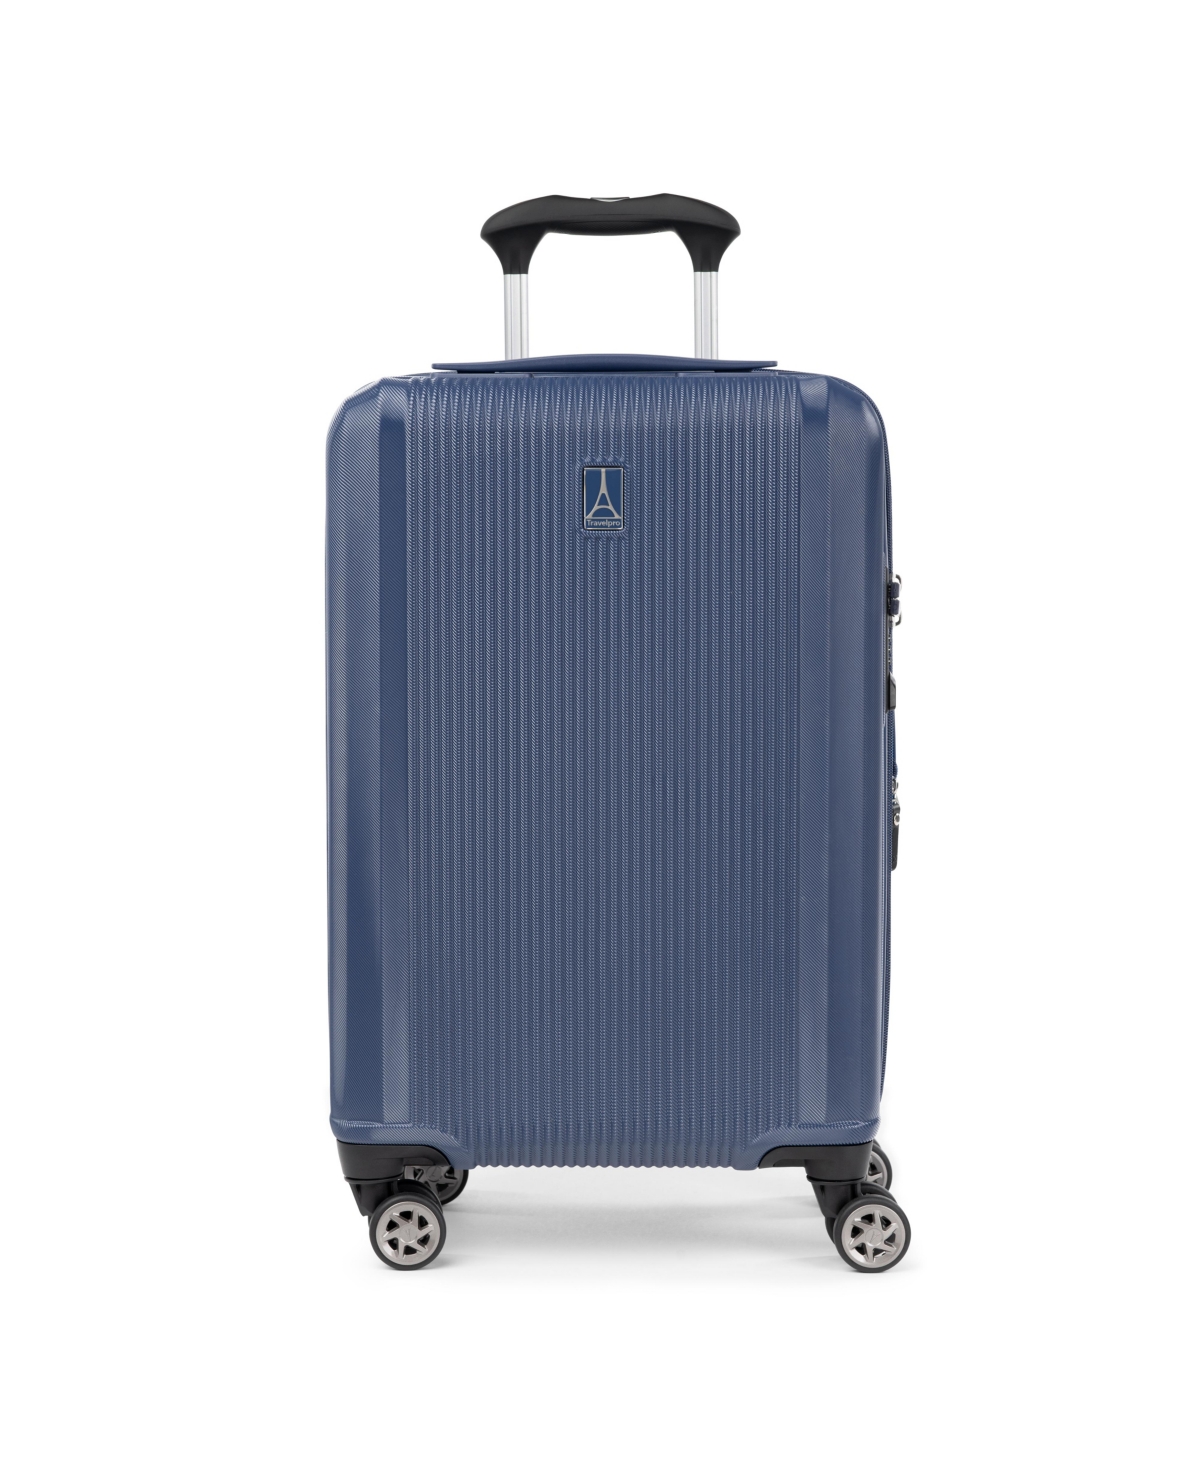 Travelpro Walkabout 6 Carry-on Expandable Hardside Spinner In Ocean Blue